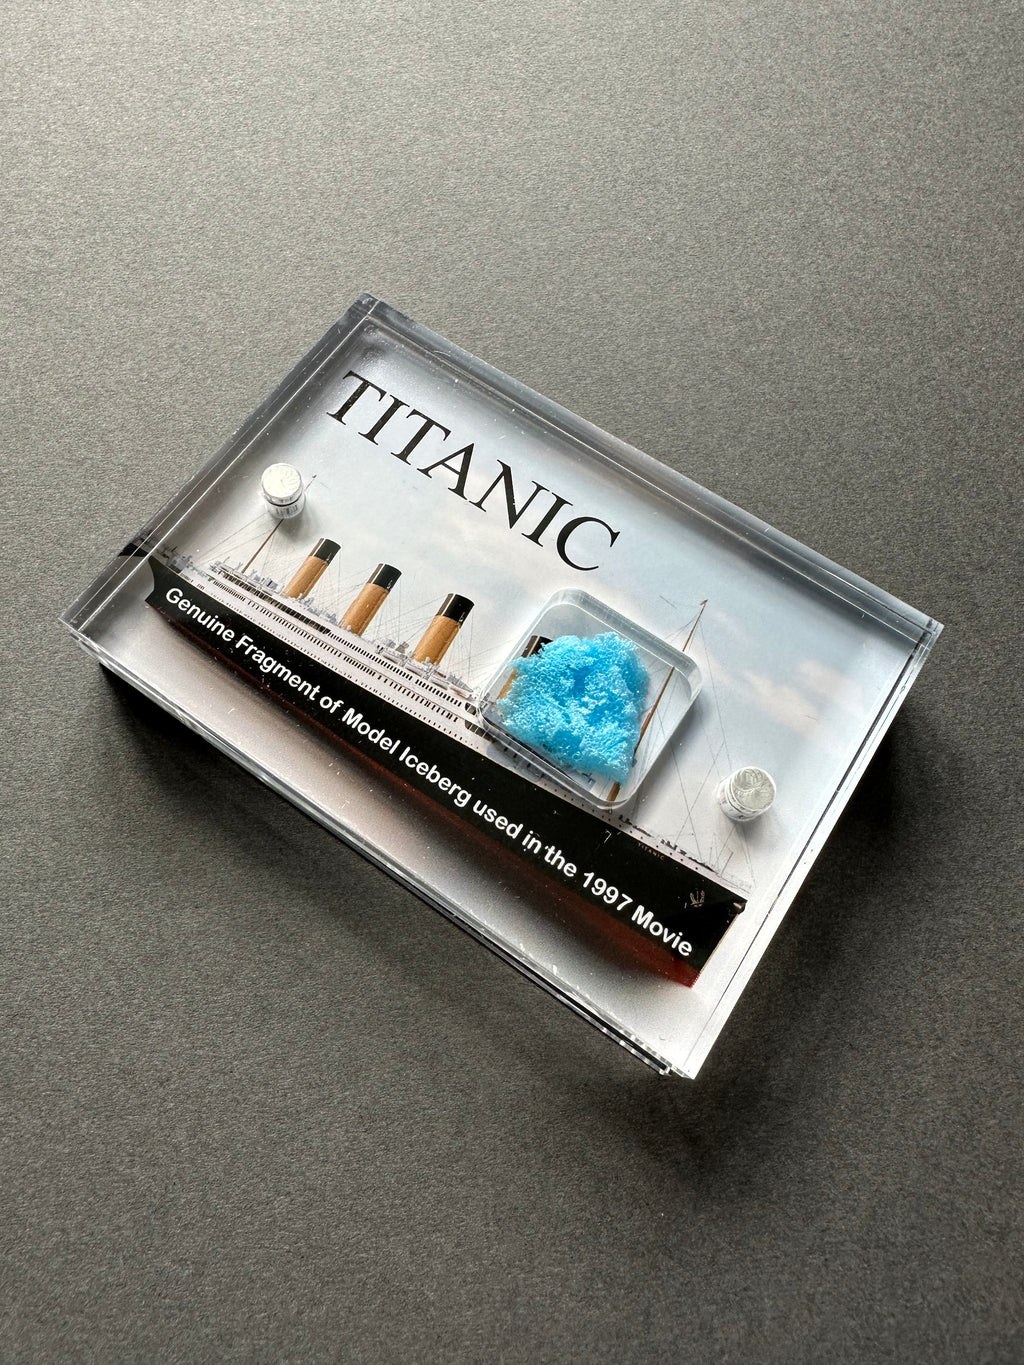 Titanic (1997) - A Piece of Prop Iceberg Miniature used in the Film